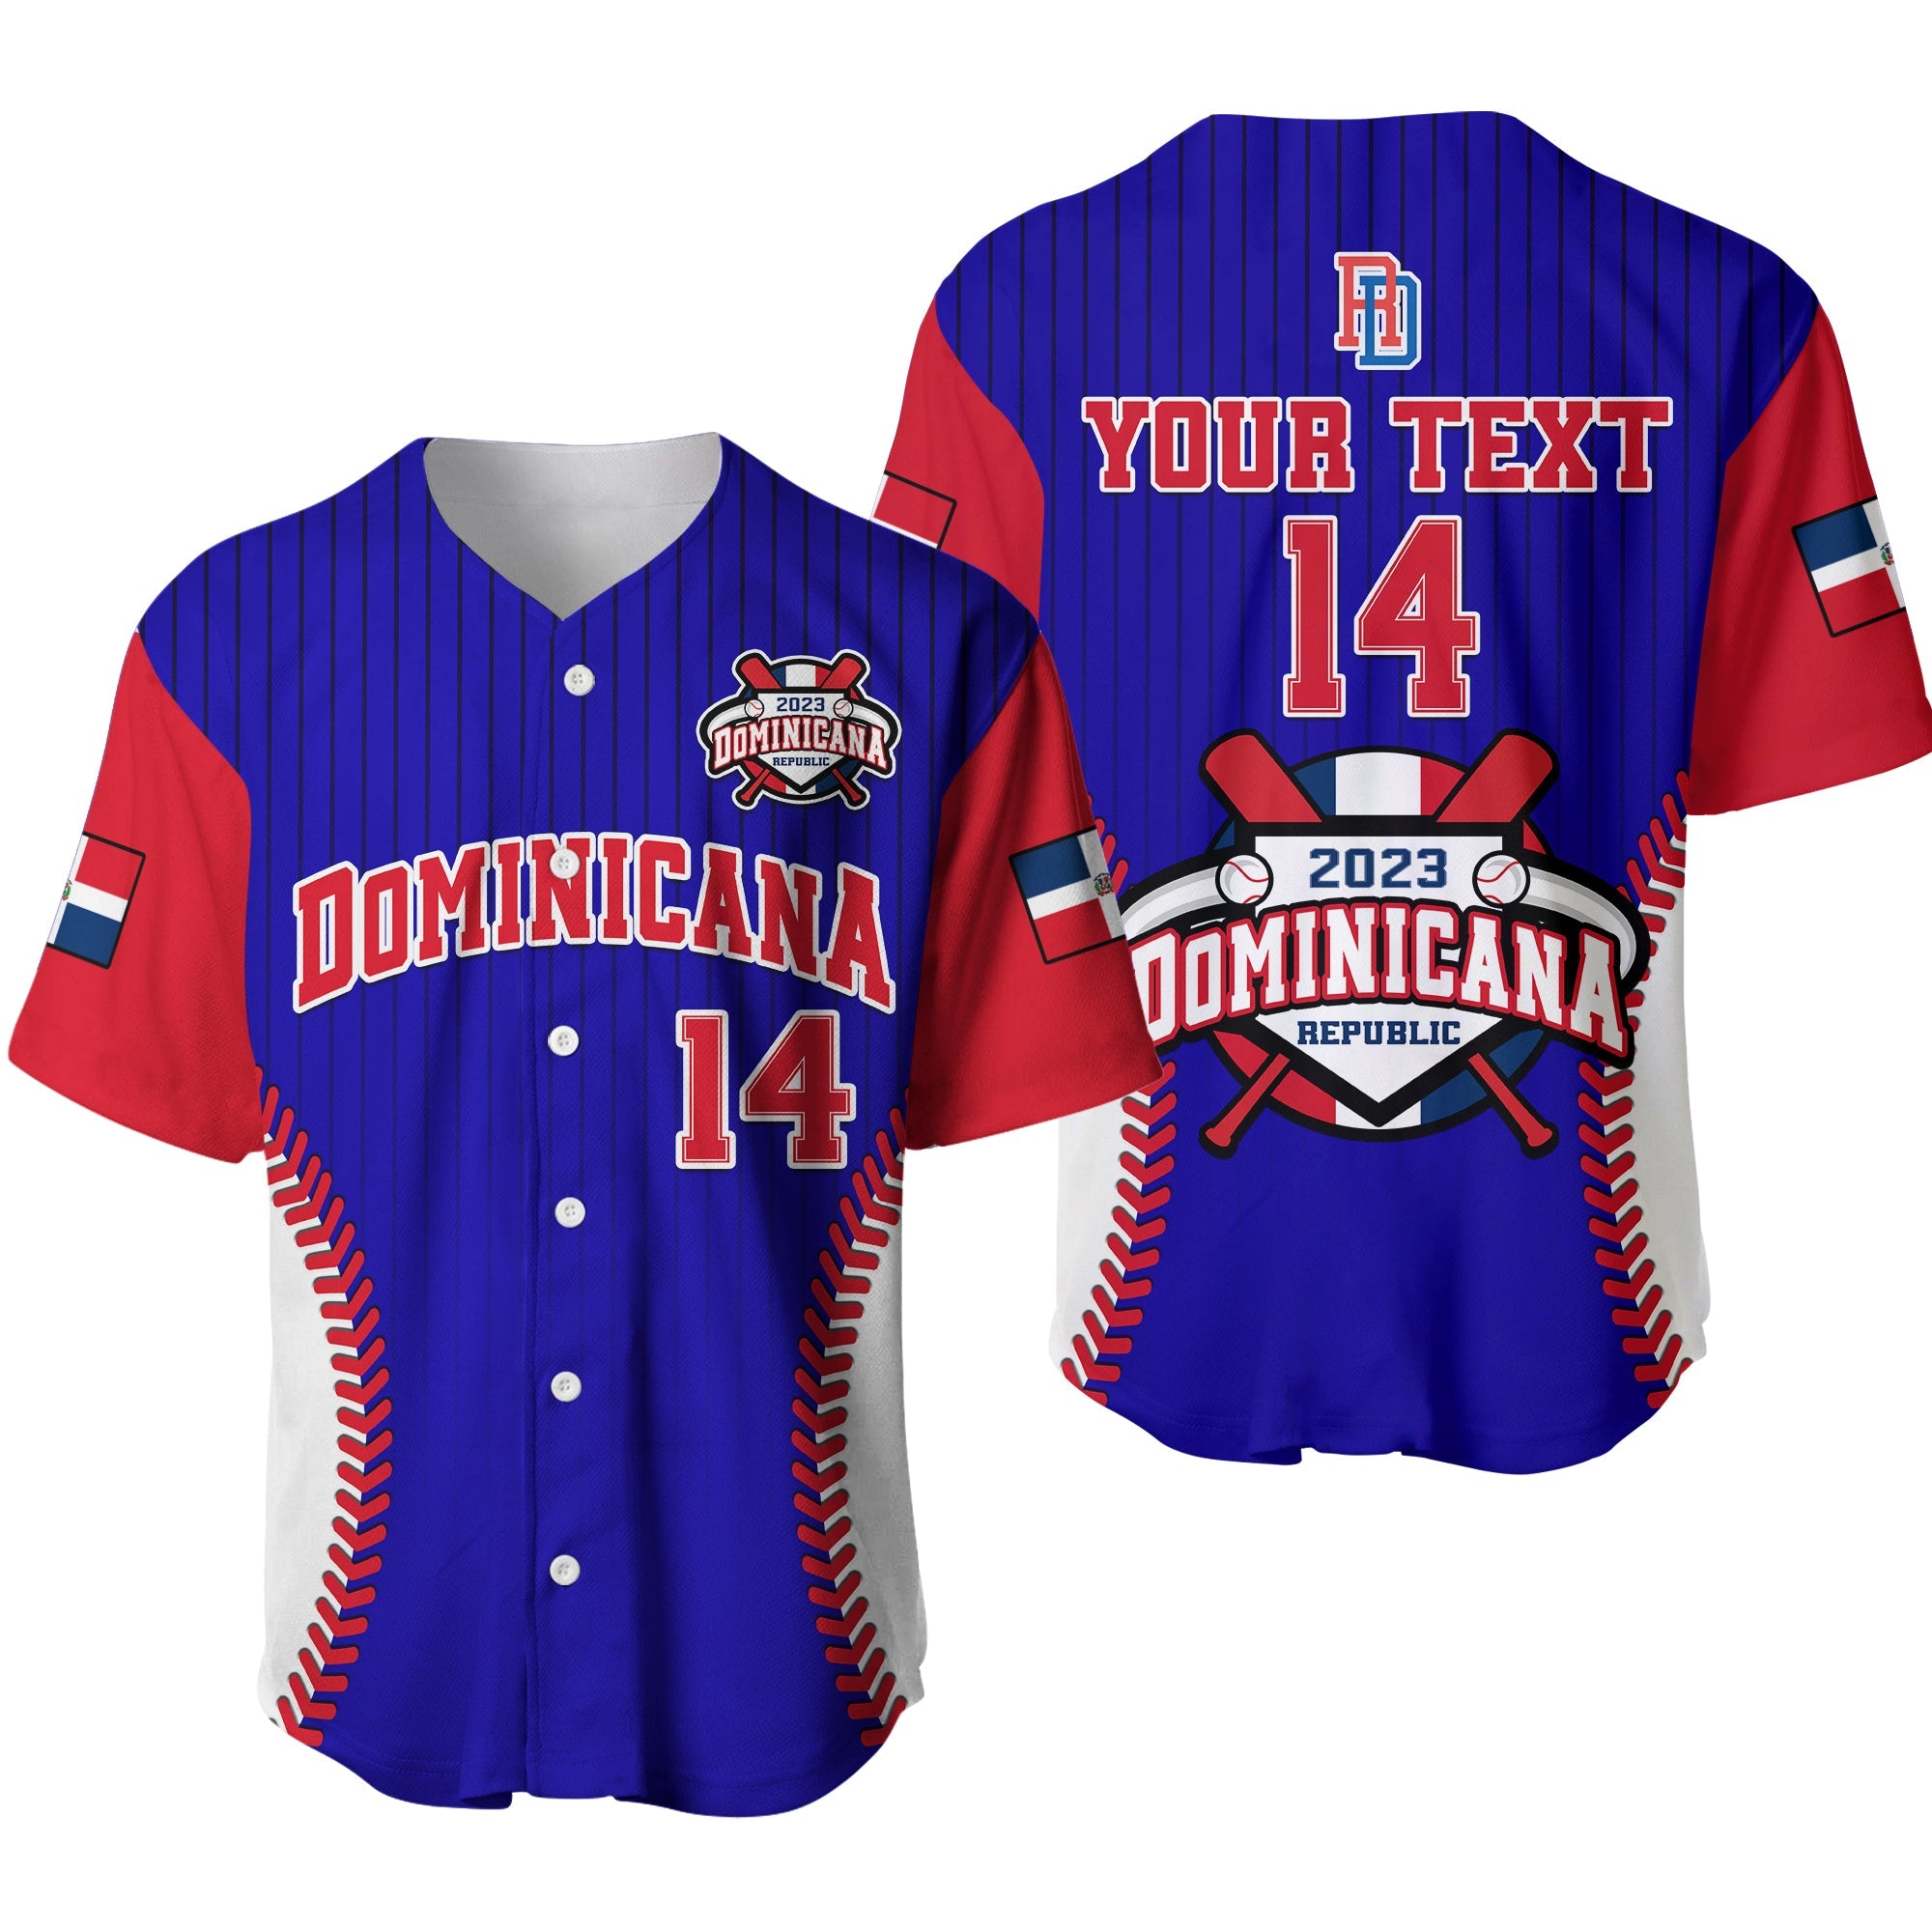 custom-text-and-number-dominican-republic-baseball-2023-baseball-jersey-version-blue-ver01